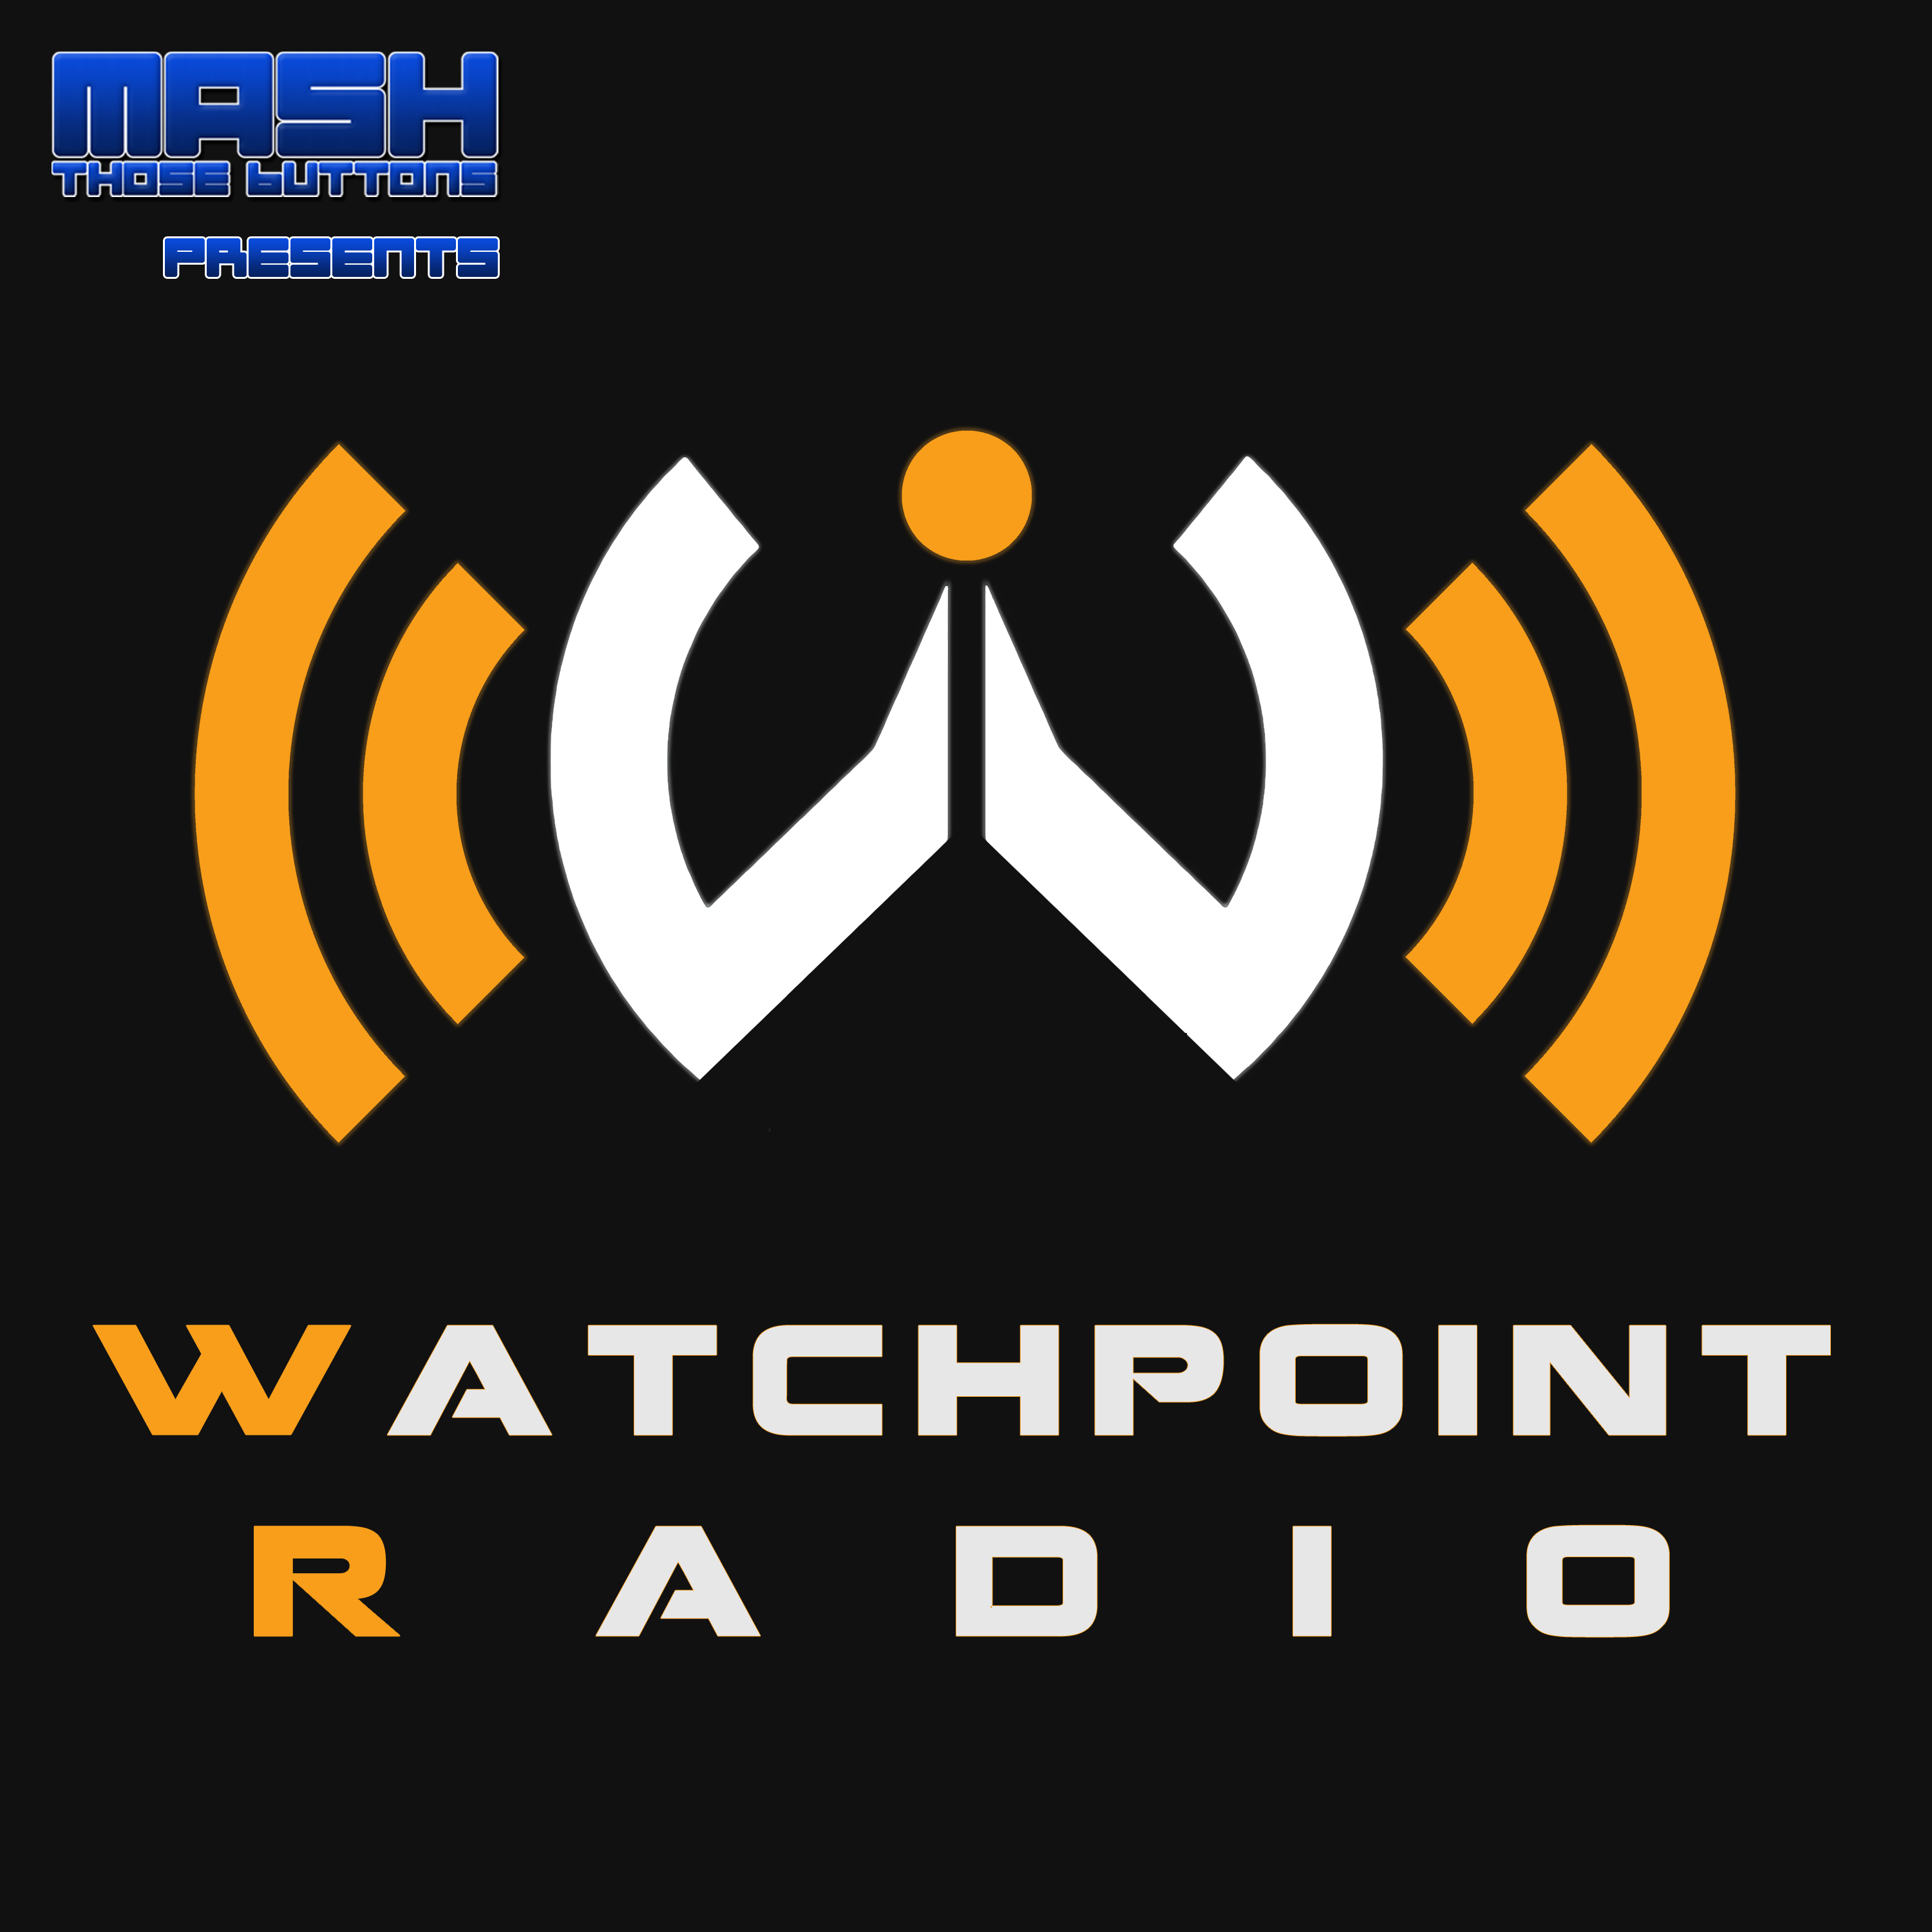 Watchpoint Radio – Overwatch News, Discussion, and Community